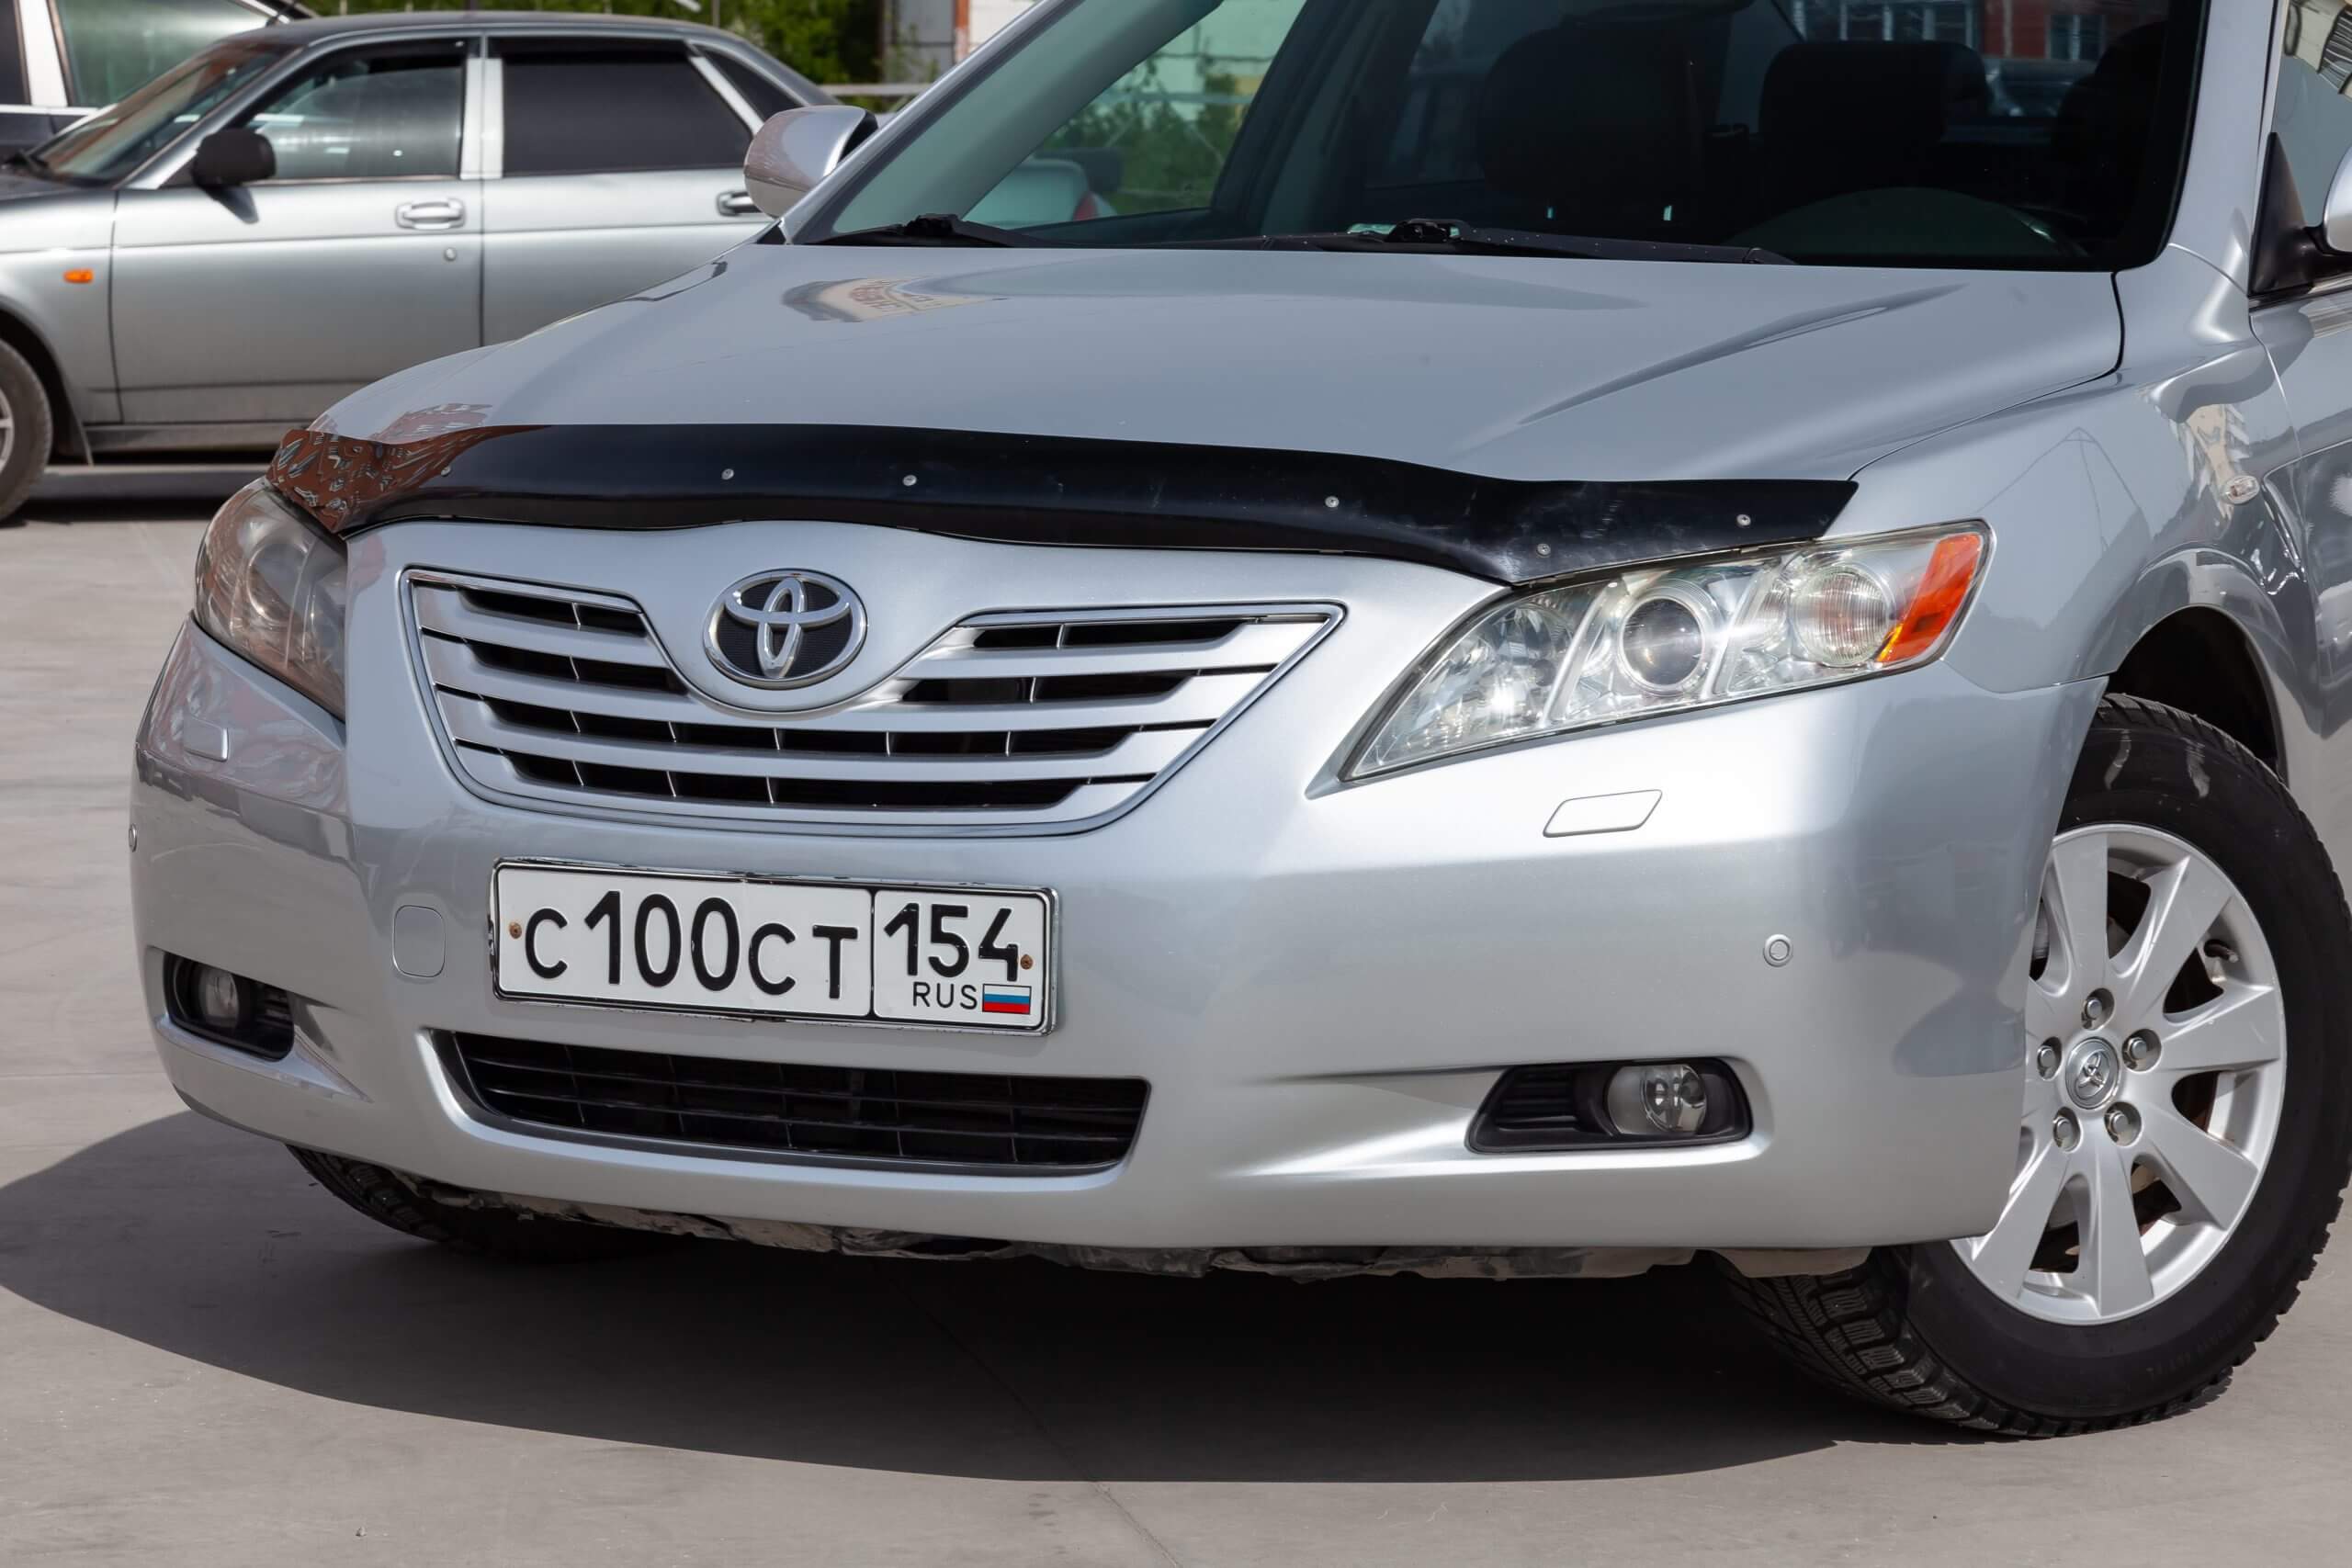  Front view of Toyota Camry 2006 in silver color in a sunny day on parking